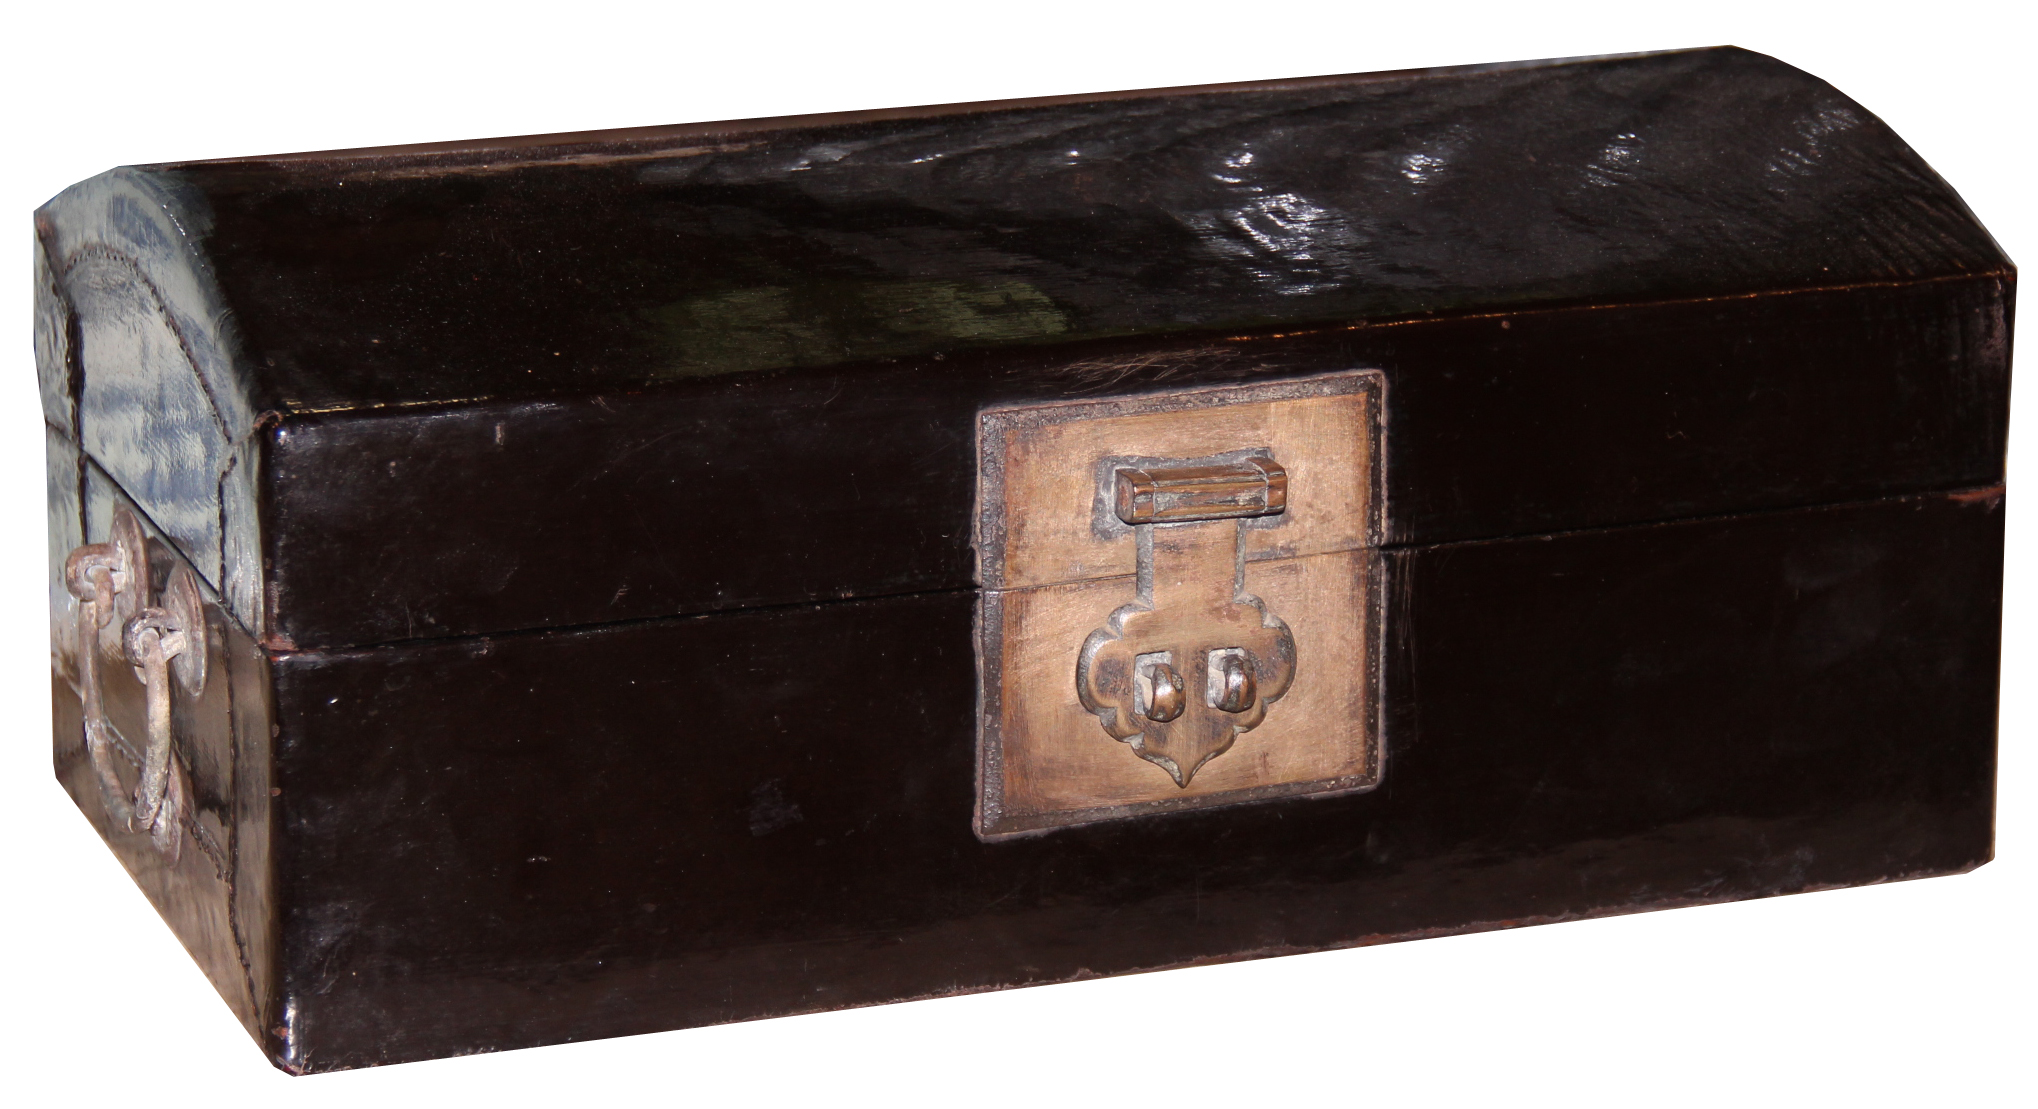 A 19th Century Chinese Black Lacquered Pigskin on Wood Valuables Box 4488